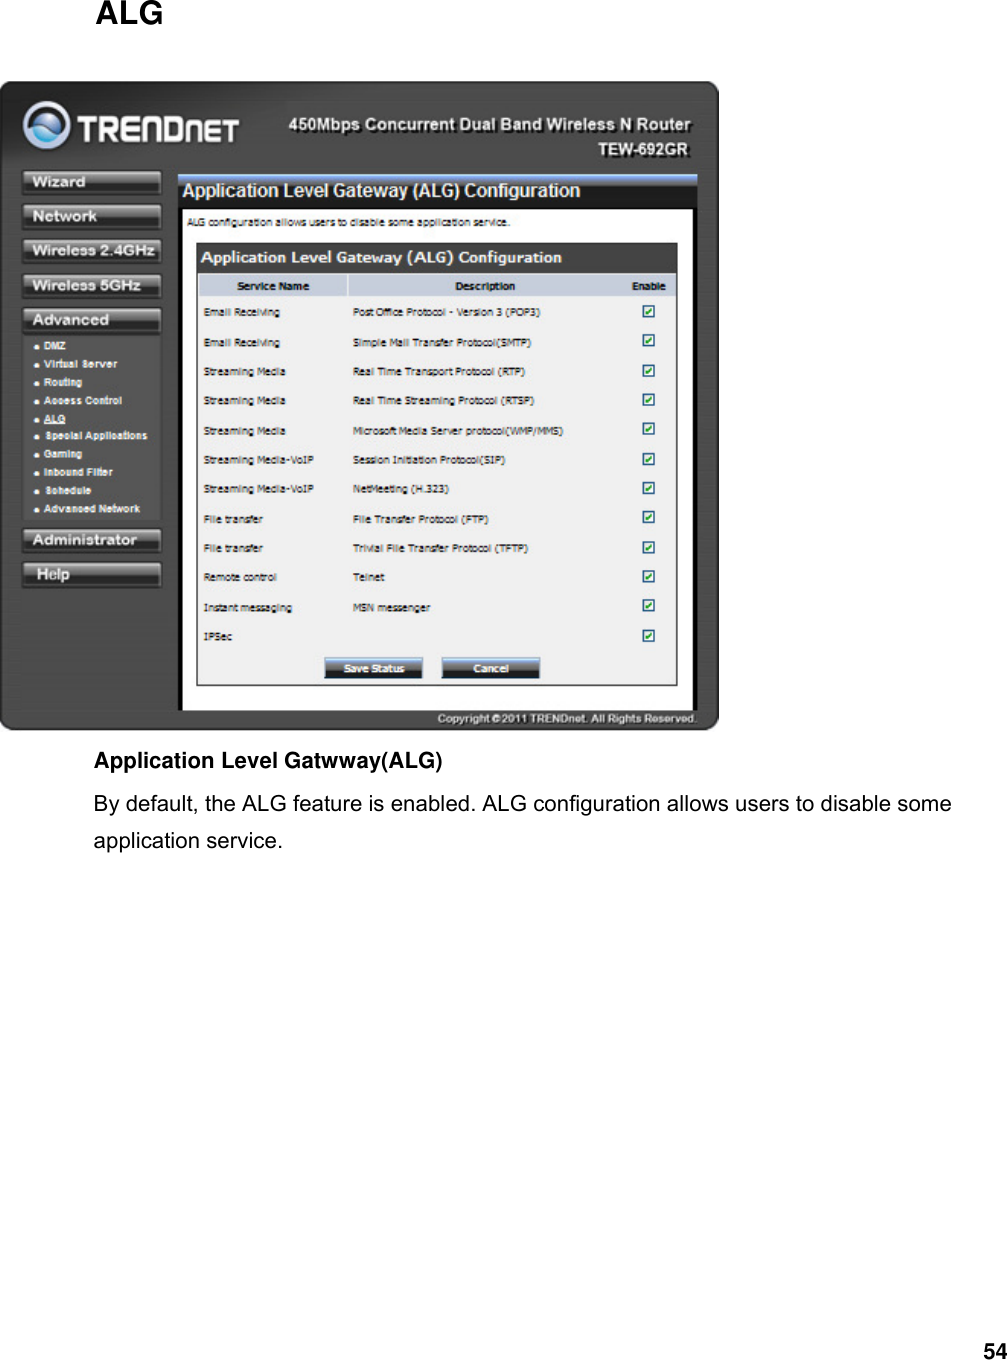 54 ALG  Application Level Gatwway(ALG) By default, the ALG feature is enabled. ALG configuration allows users to disable some application service.        